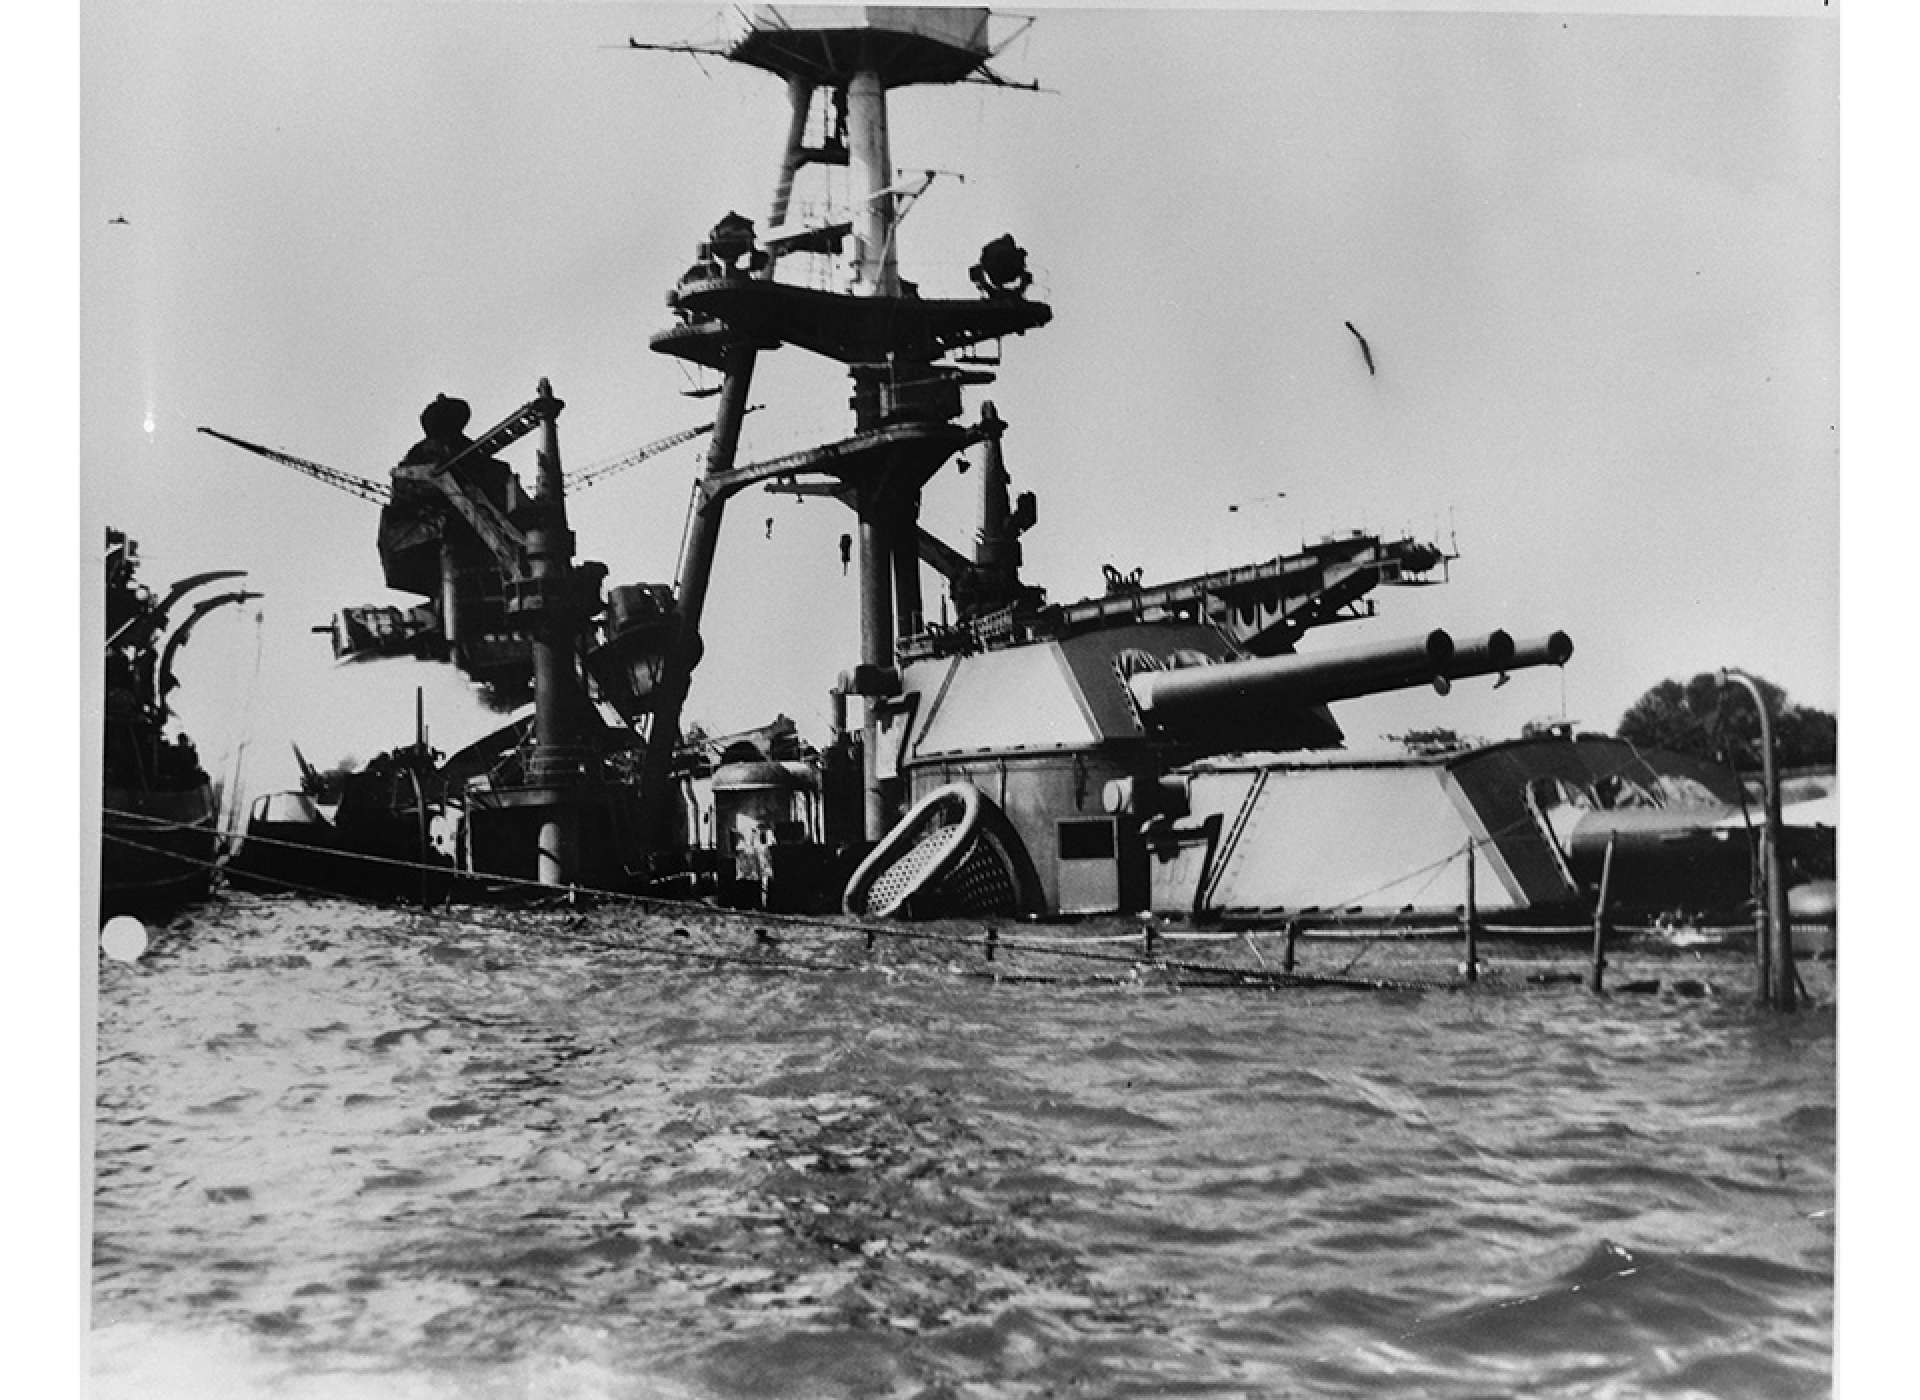 A view of the aft portion of the USS Arizona